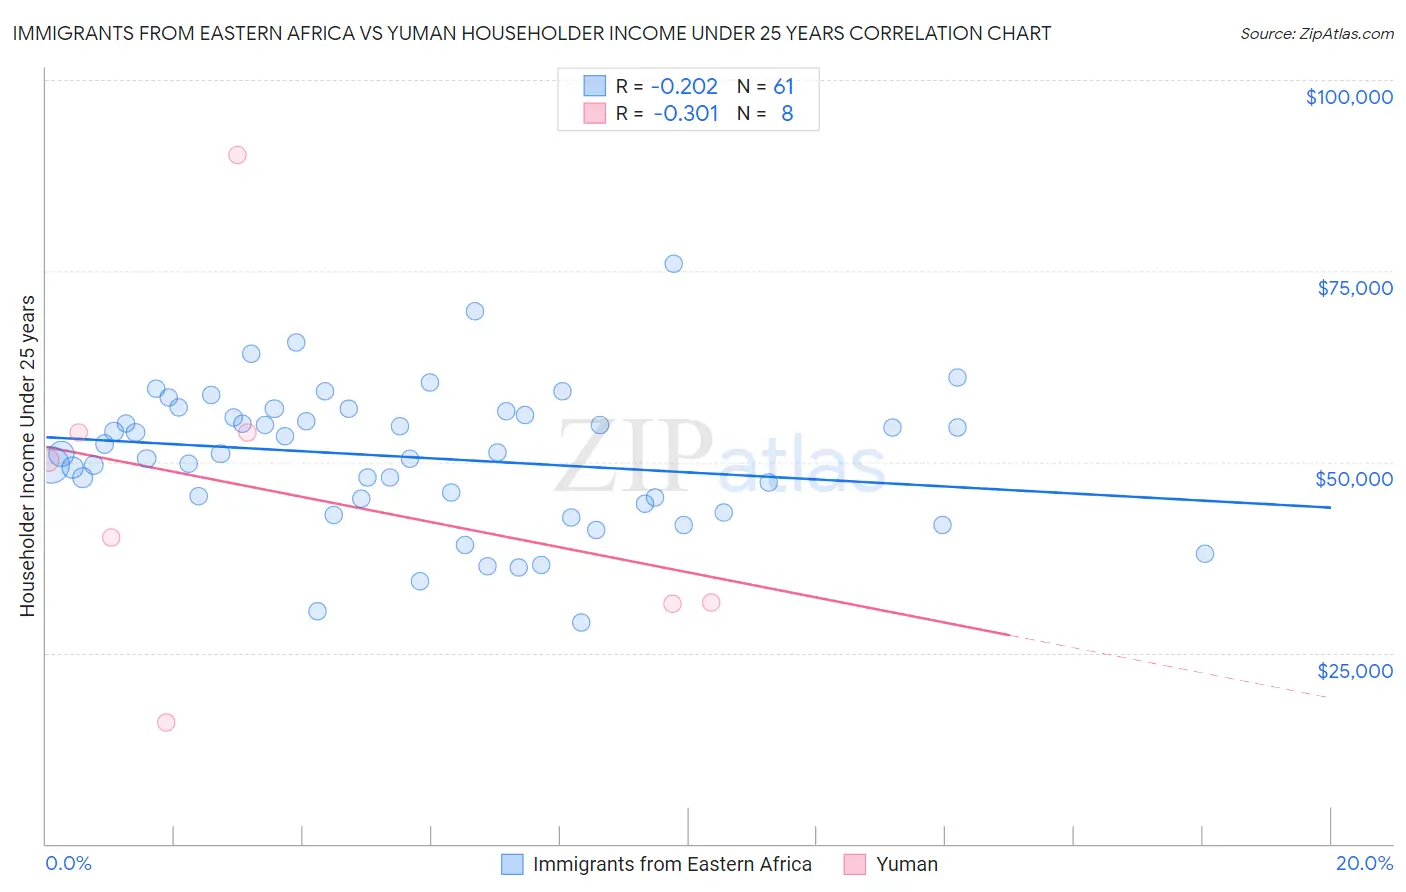 Immigrants from Eastern Africa vs Yuman Householder Income Under 25 years